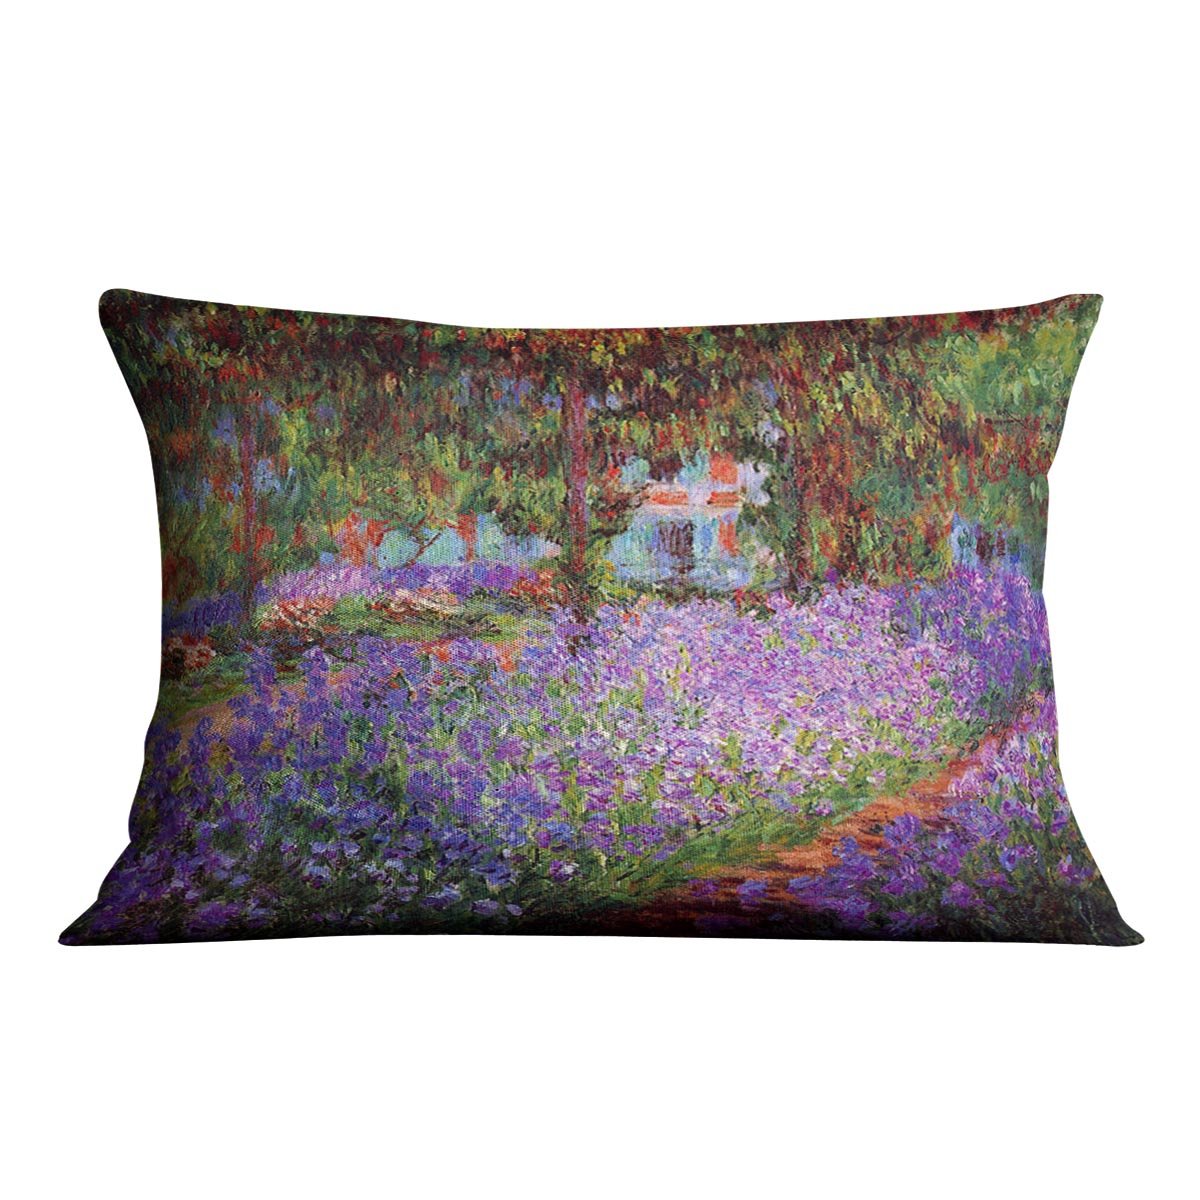 Garden in Giverny by Monet Throw Pillow